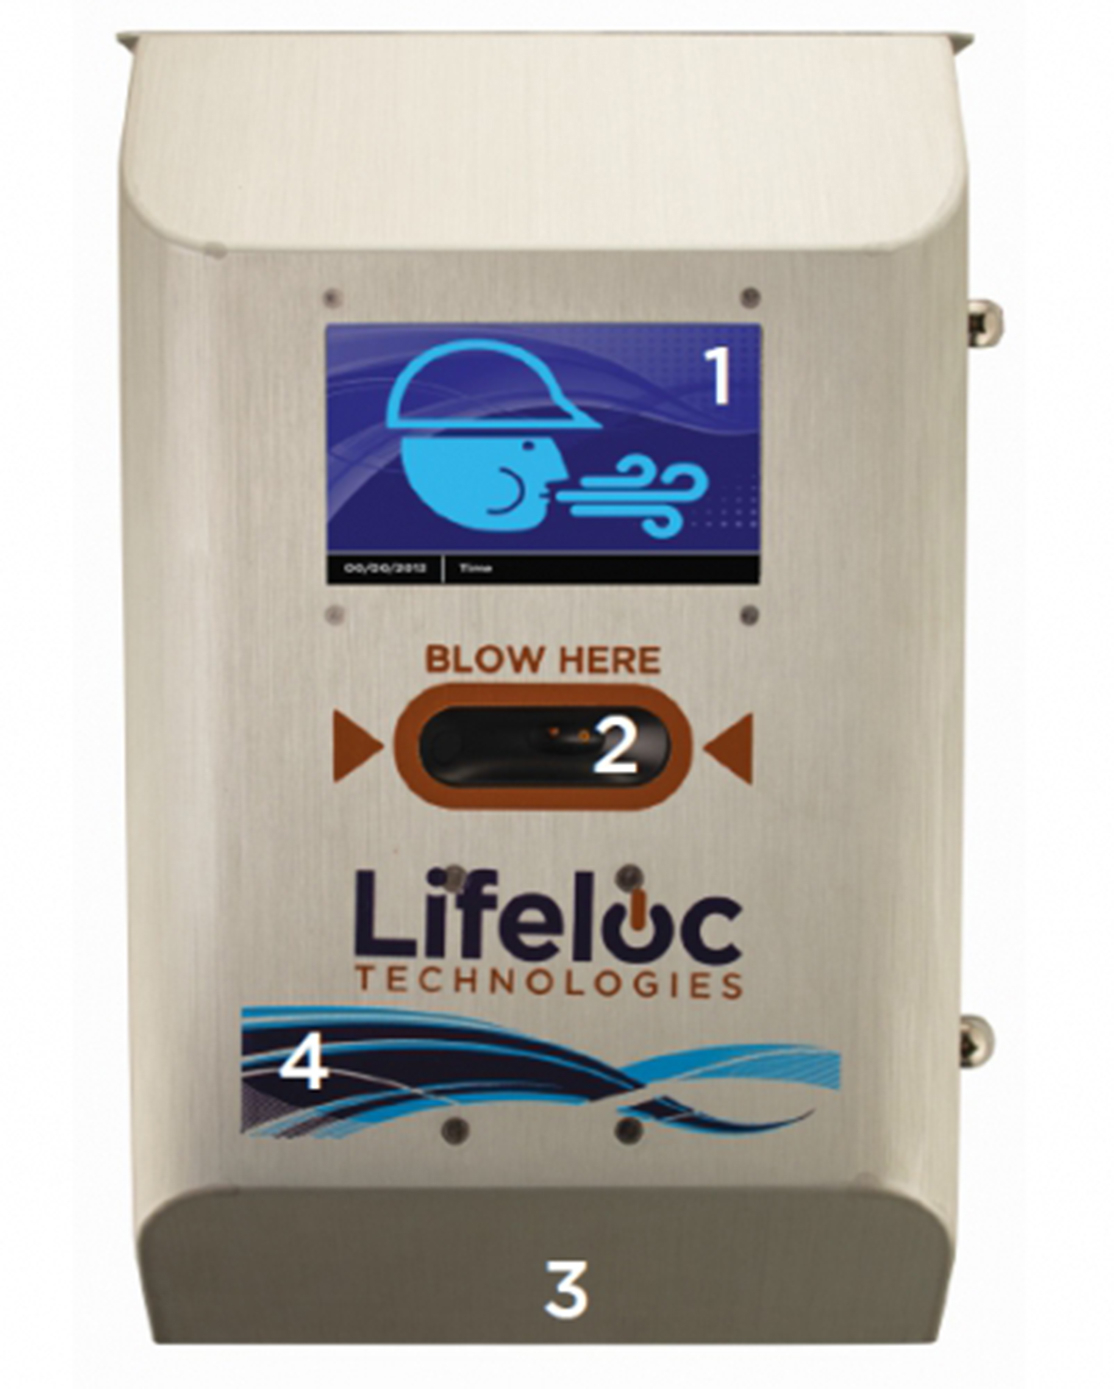 Lifeloc Sentinel access control system for monitoring entry into premises